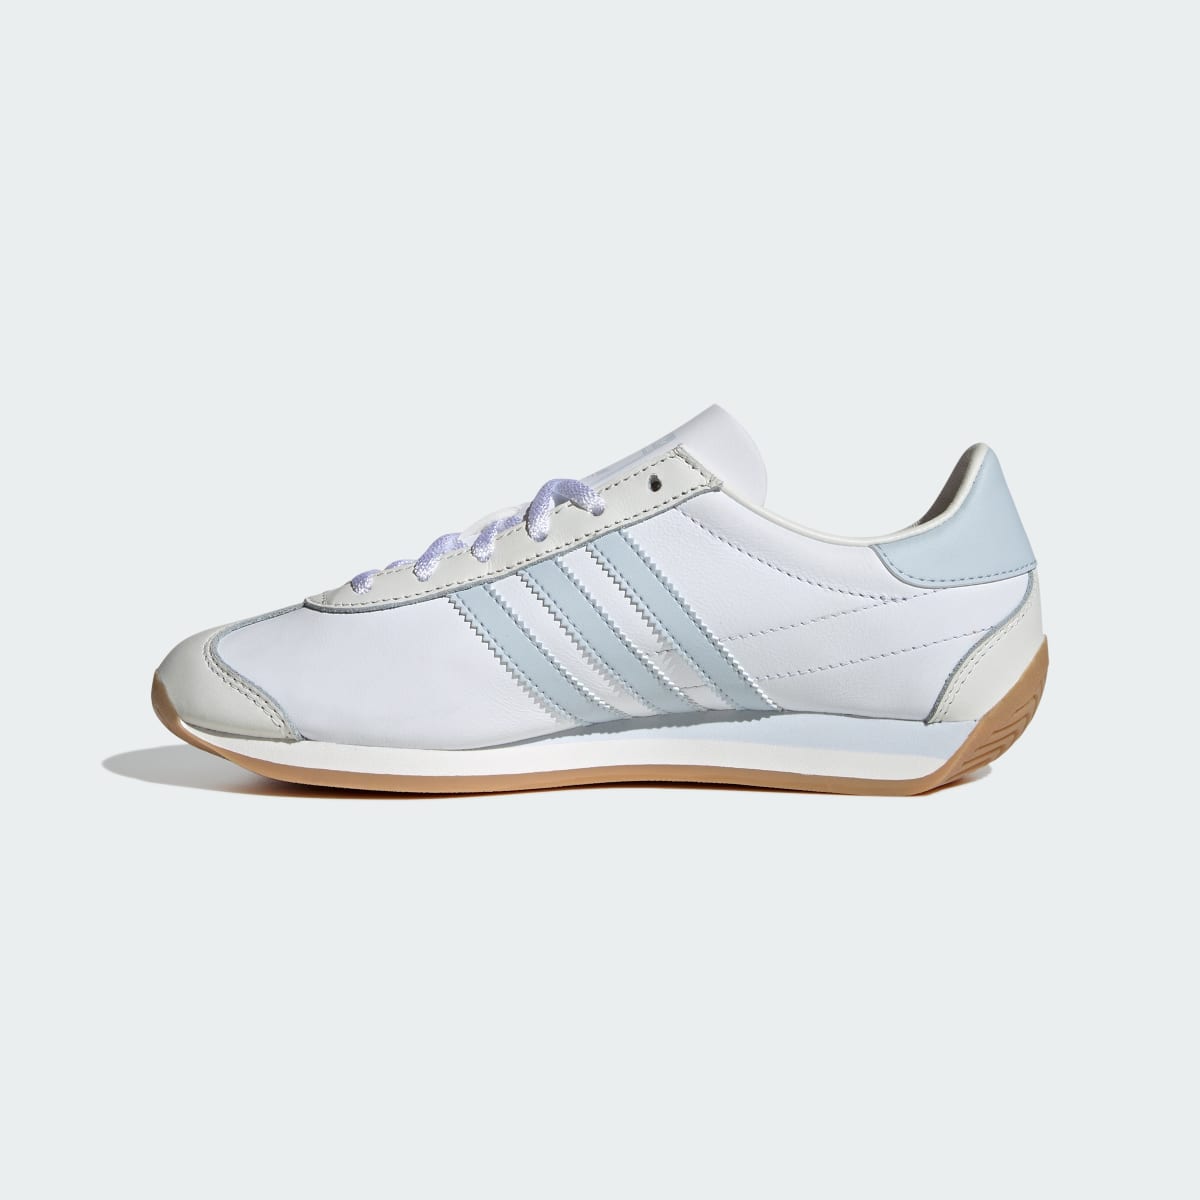 Adidas Chaussure Country OG. 7